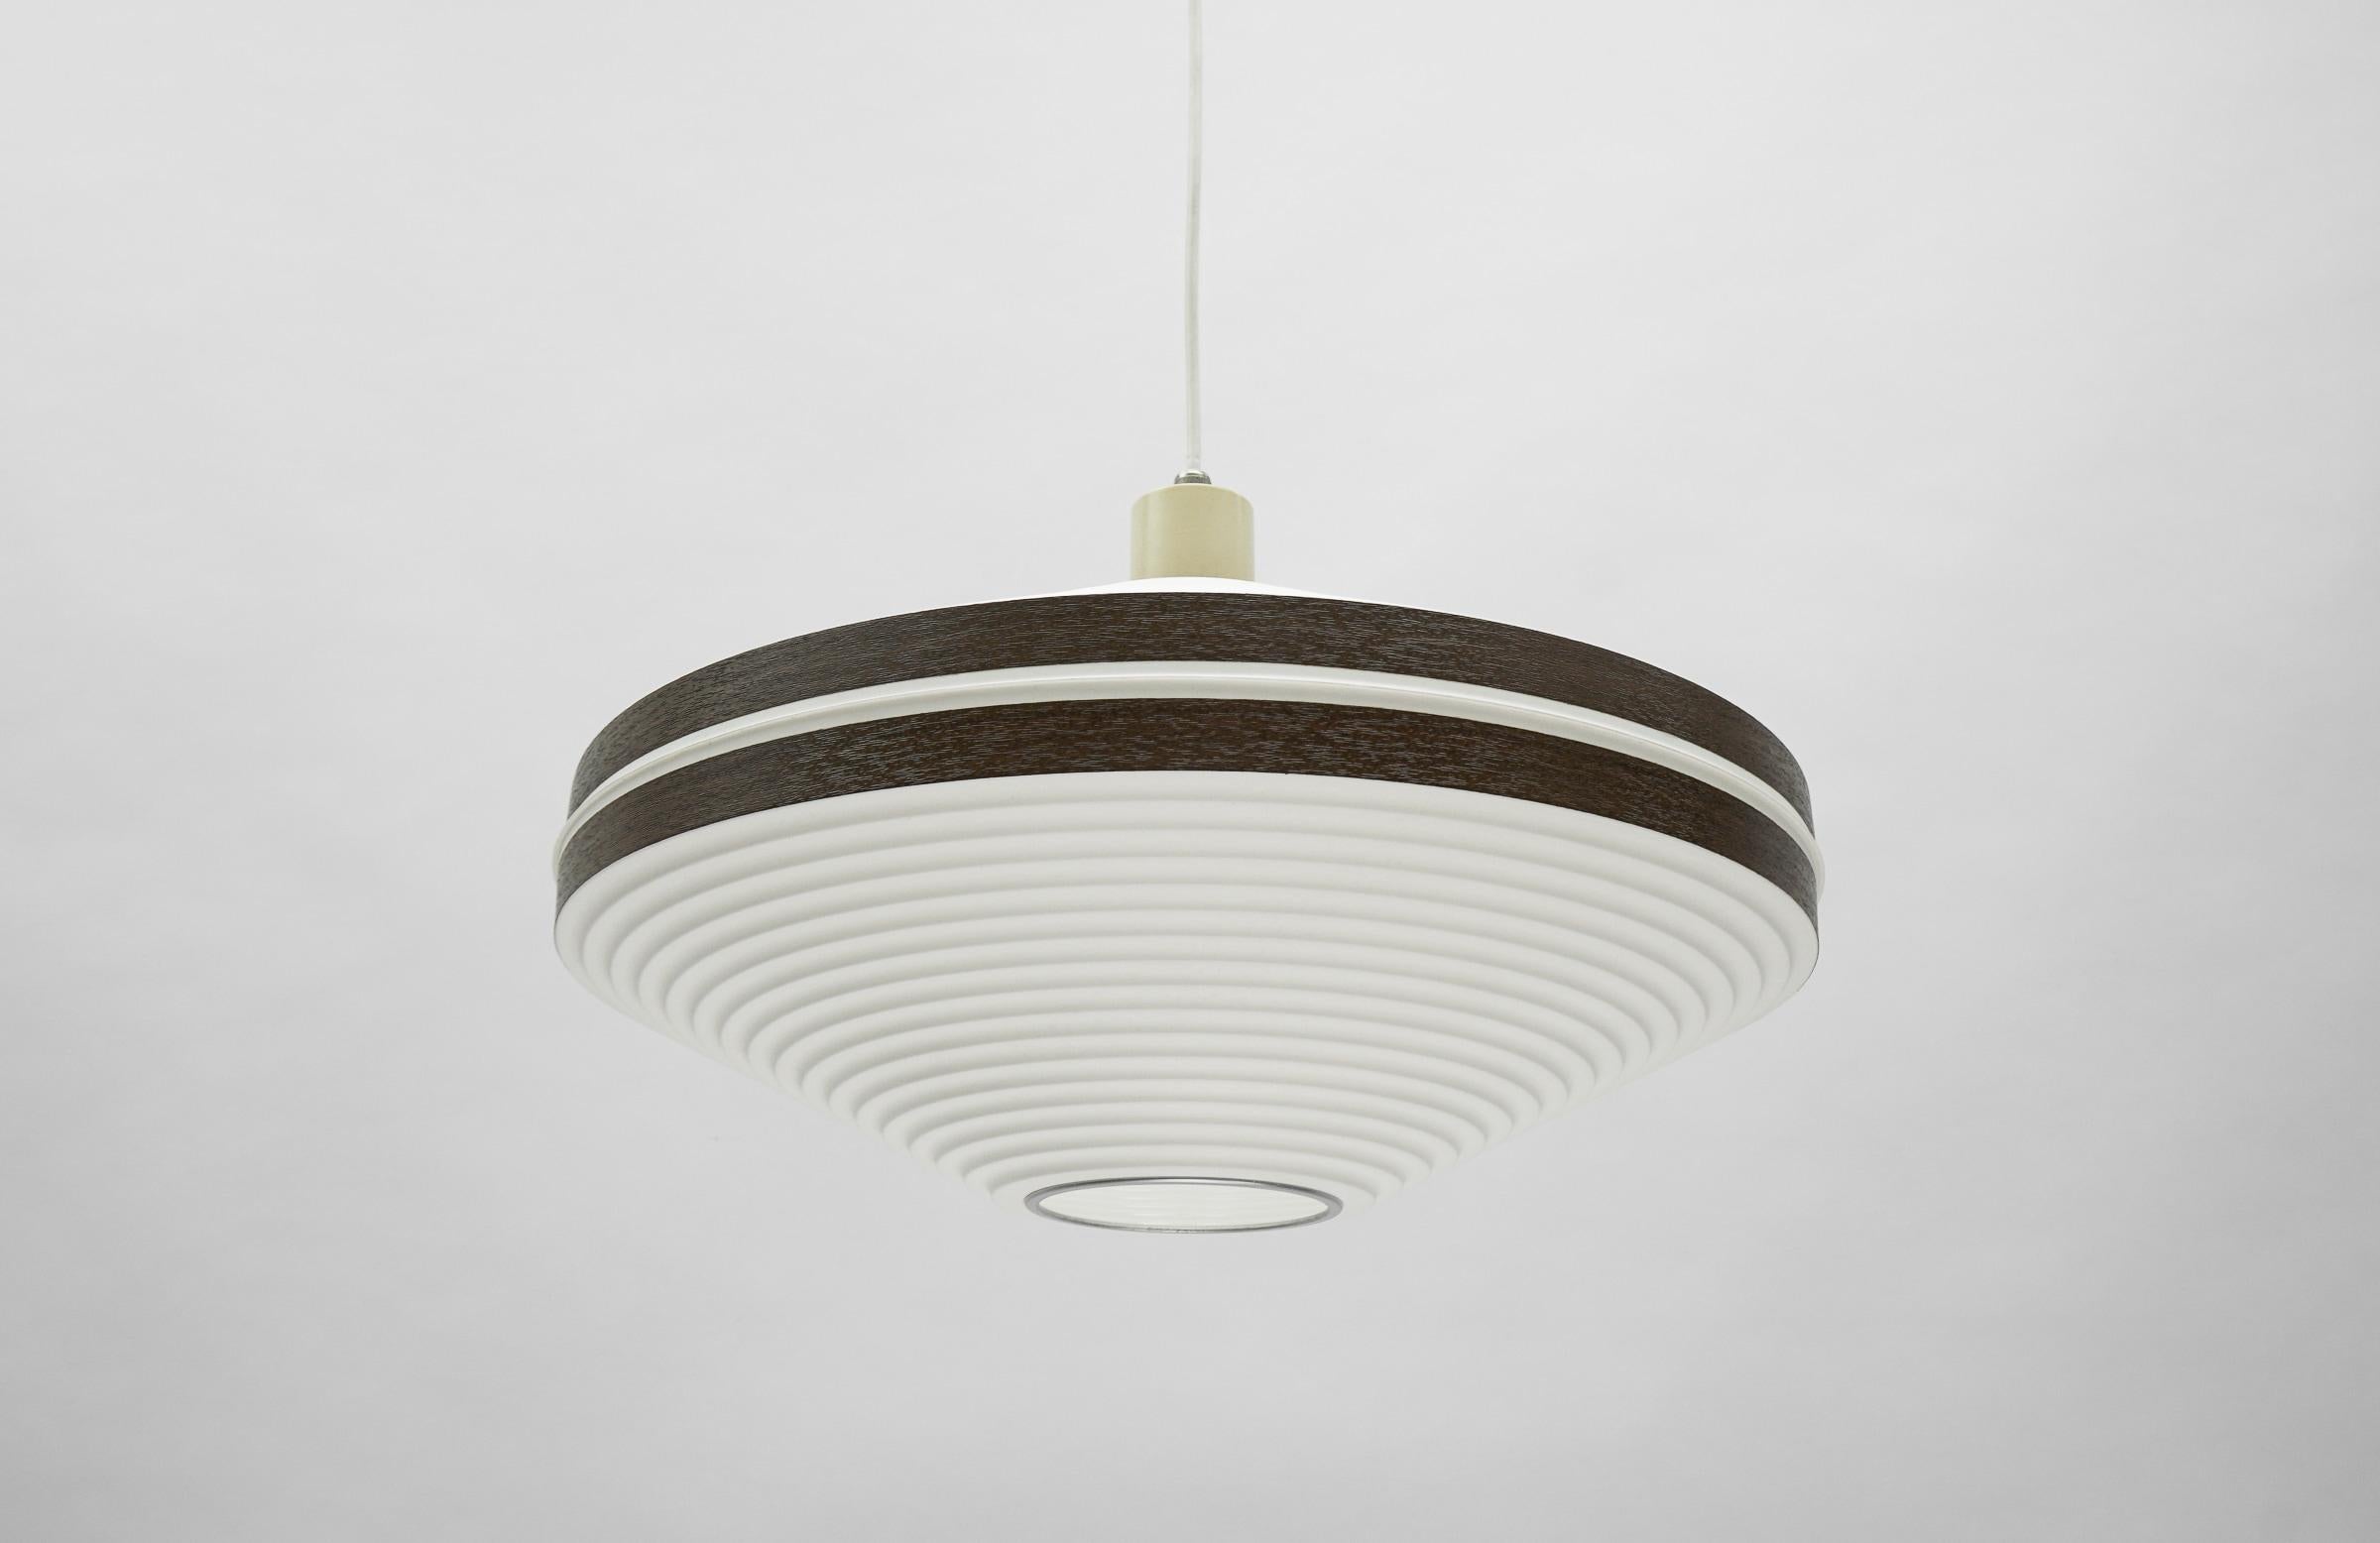 Mid-20th Century Rare Brown & White Ufo Pendant Lamp by Aloys F. Gangkofner for ERCO Leuchten For Sale